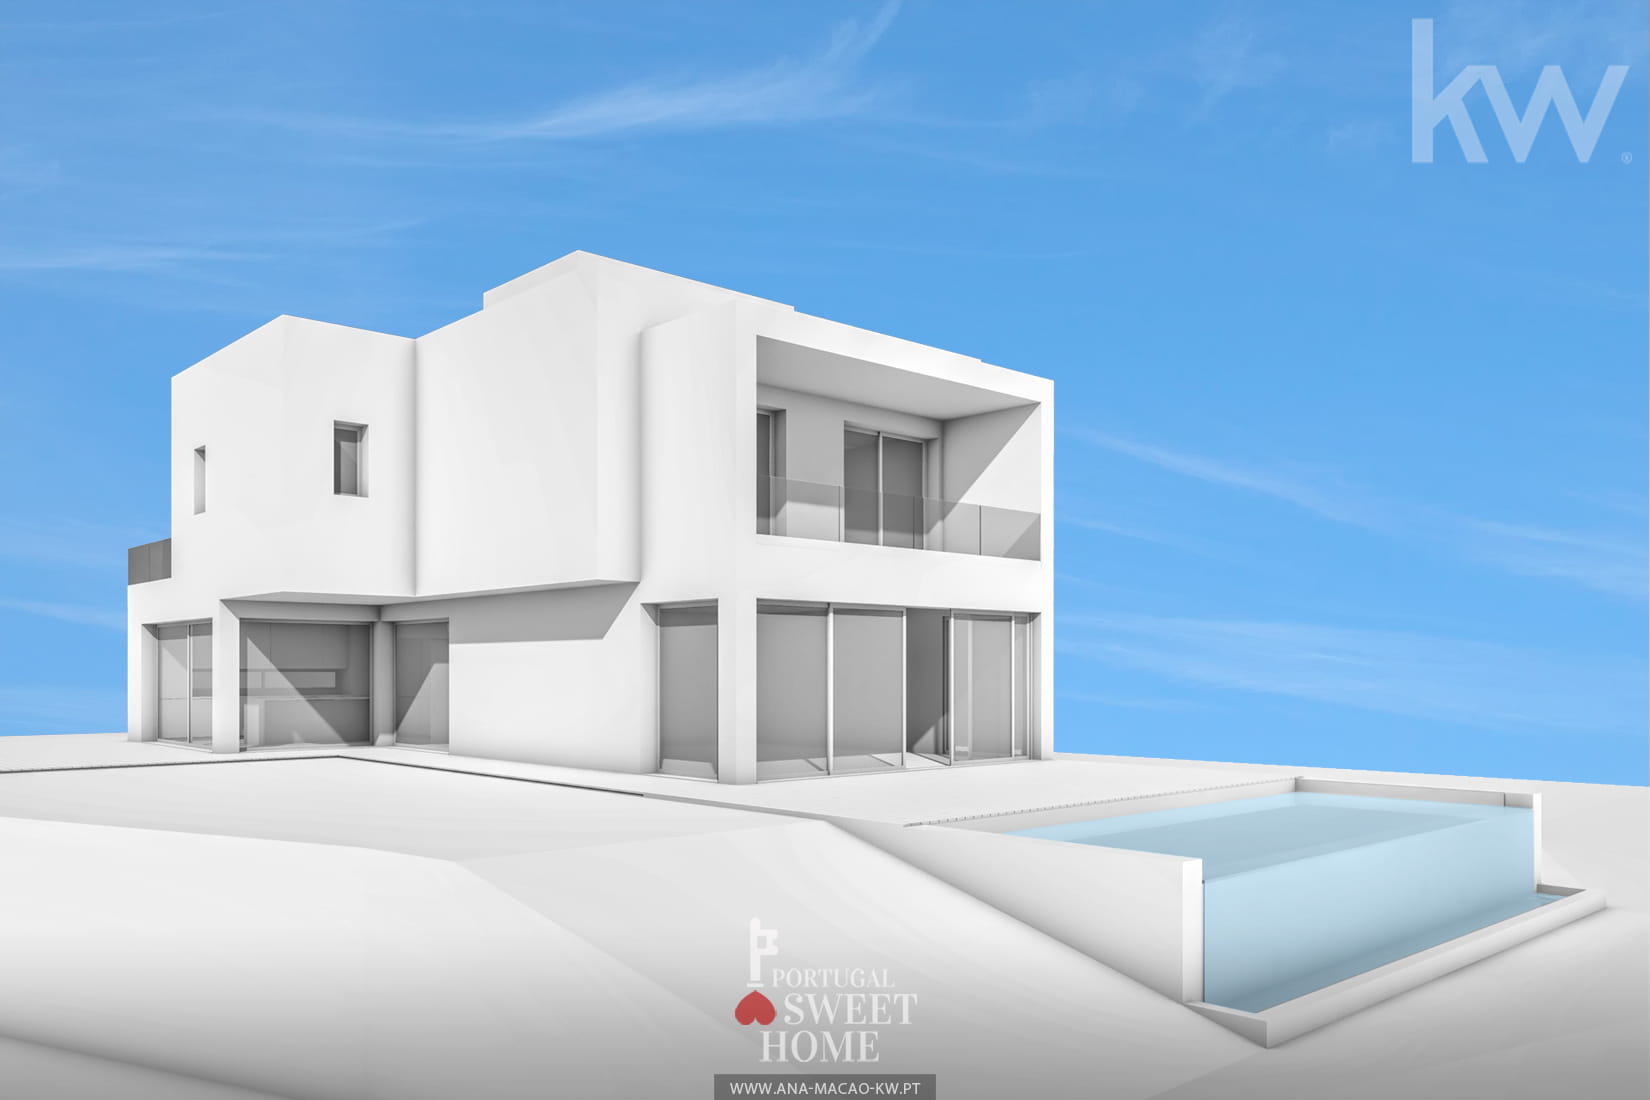 Exterior view of the house (Project)